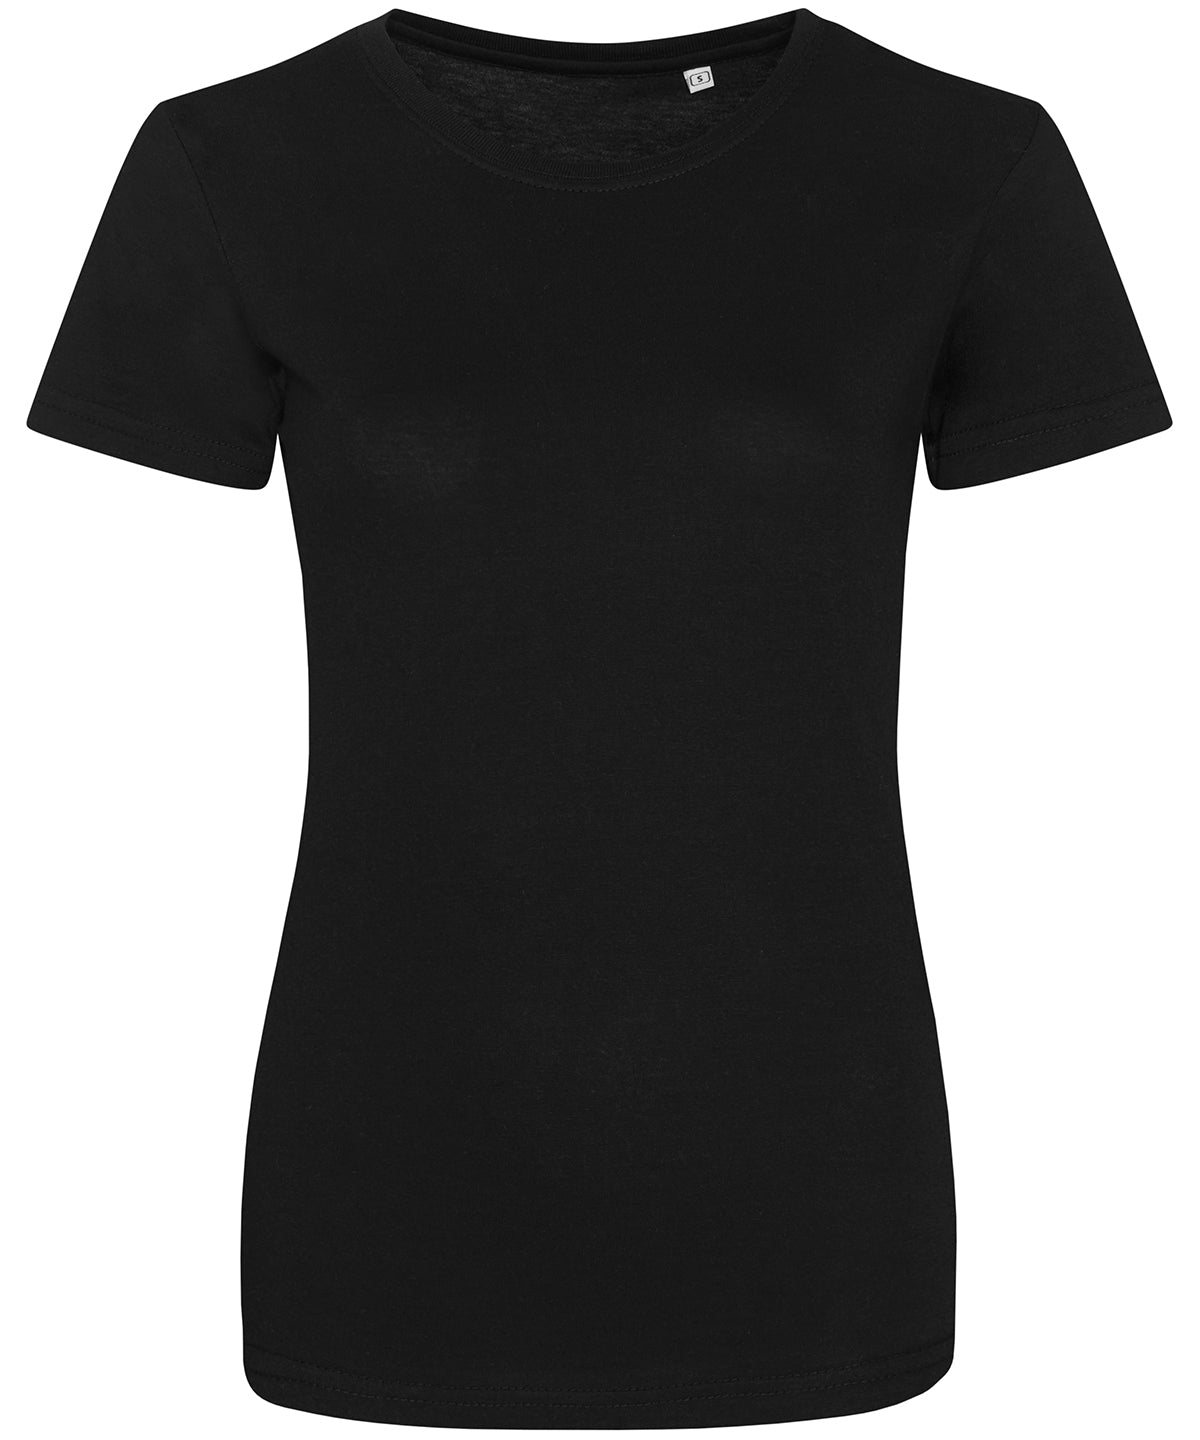 Personalised T-Shirts - Black AWDis Just T's Women's triblend T